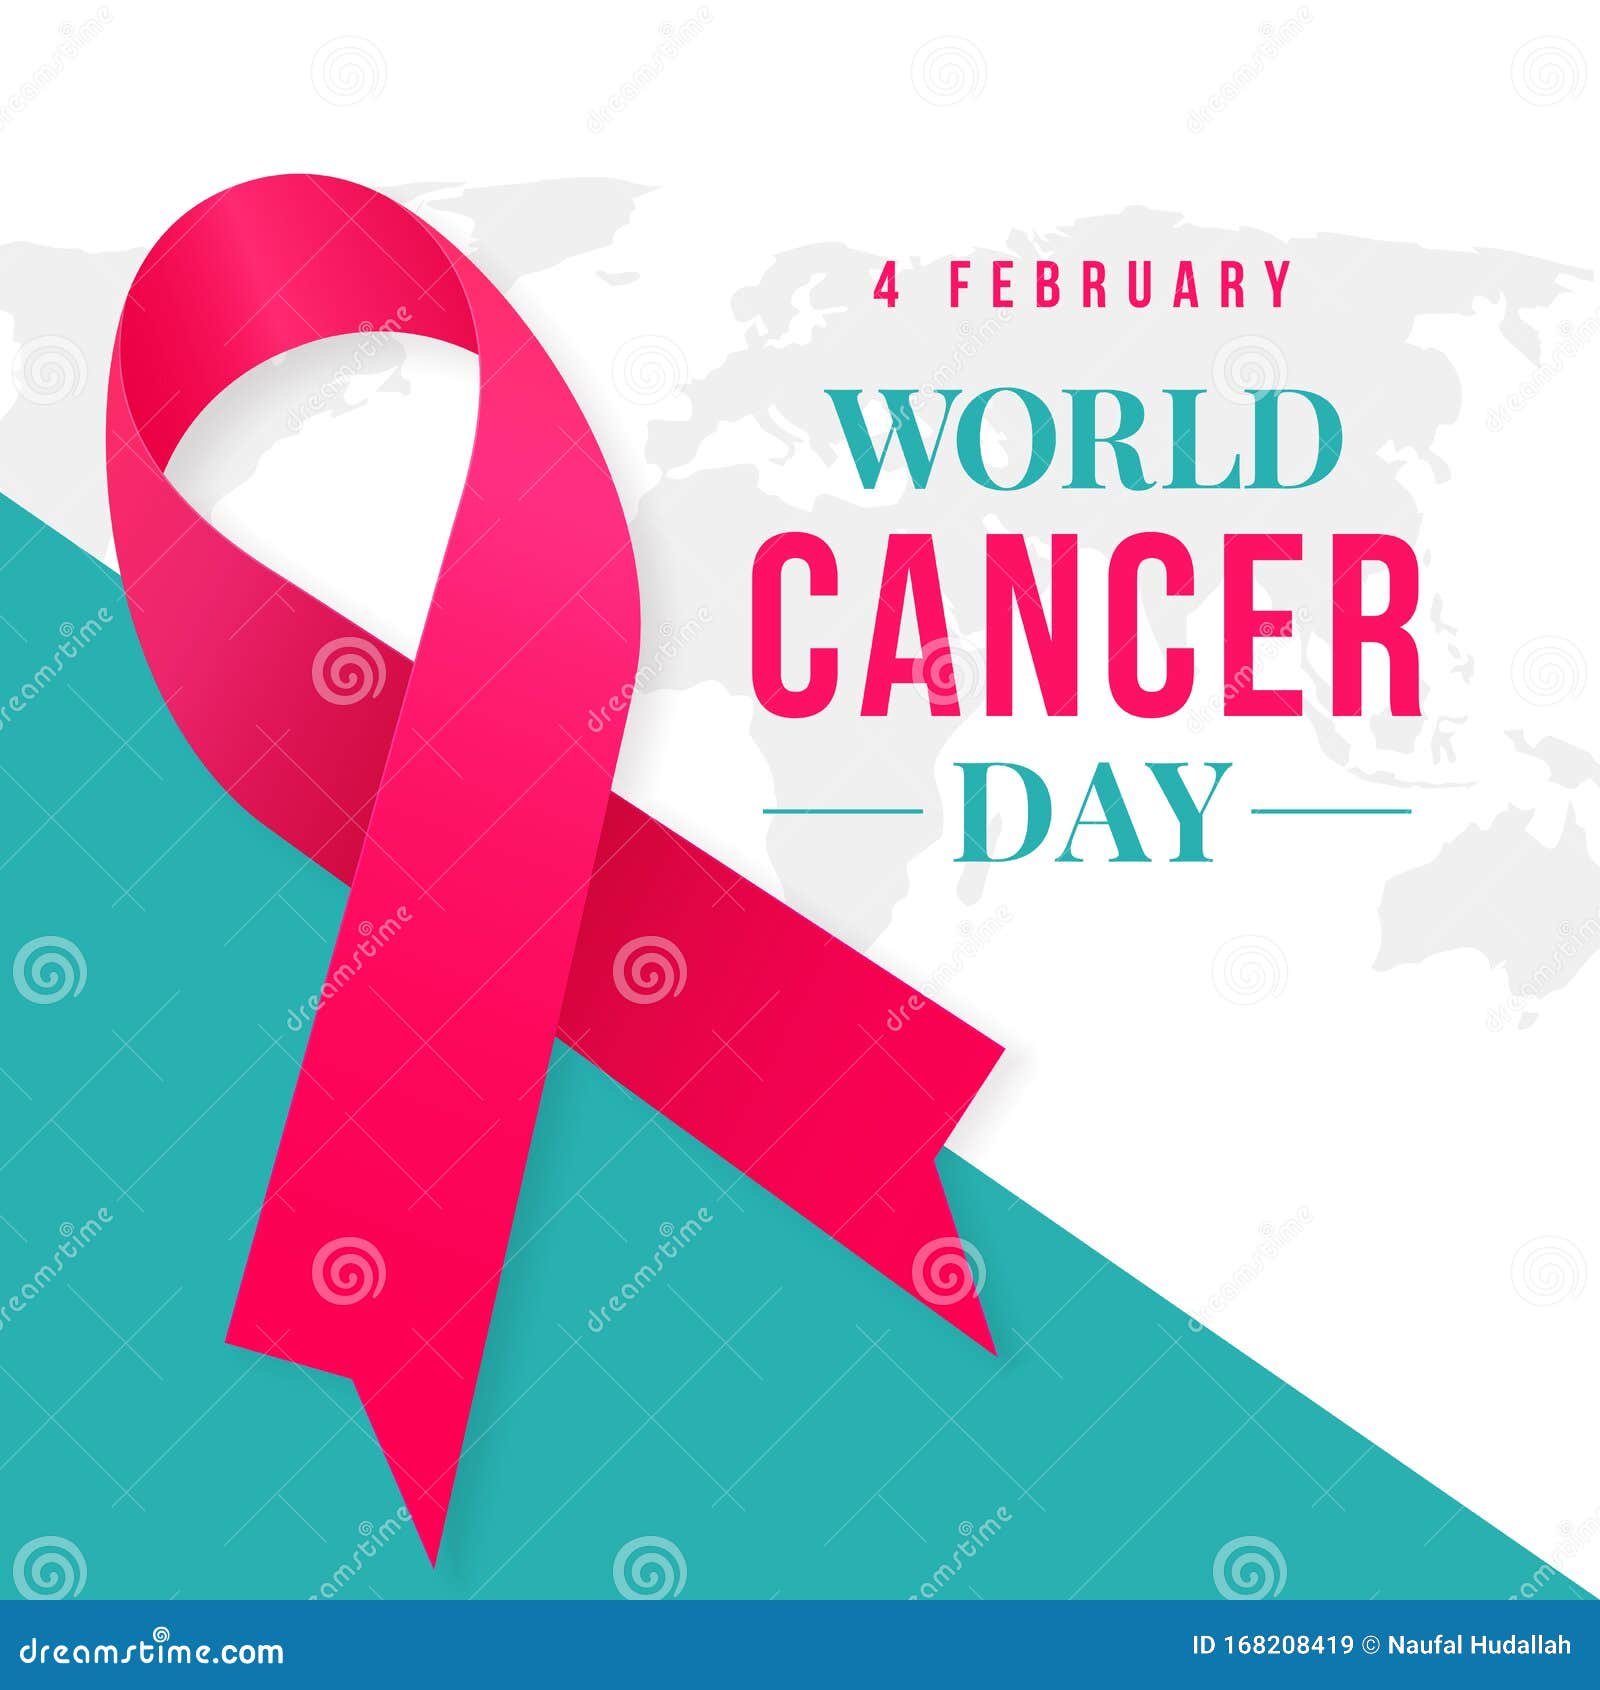 World Cancer Day Poster Background Template Design With Ribbon Symbol Illustration Stock Illustration Illustration Of Happy Background